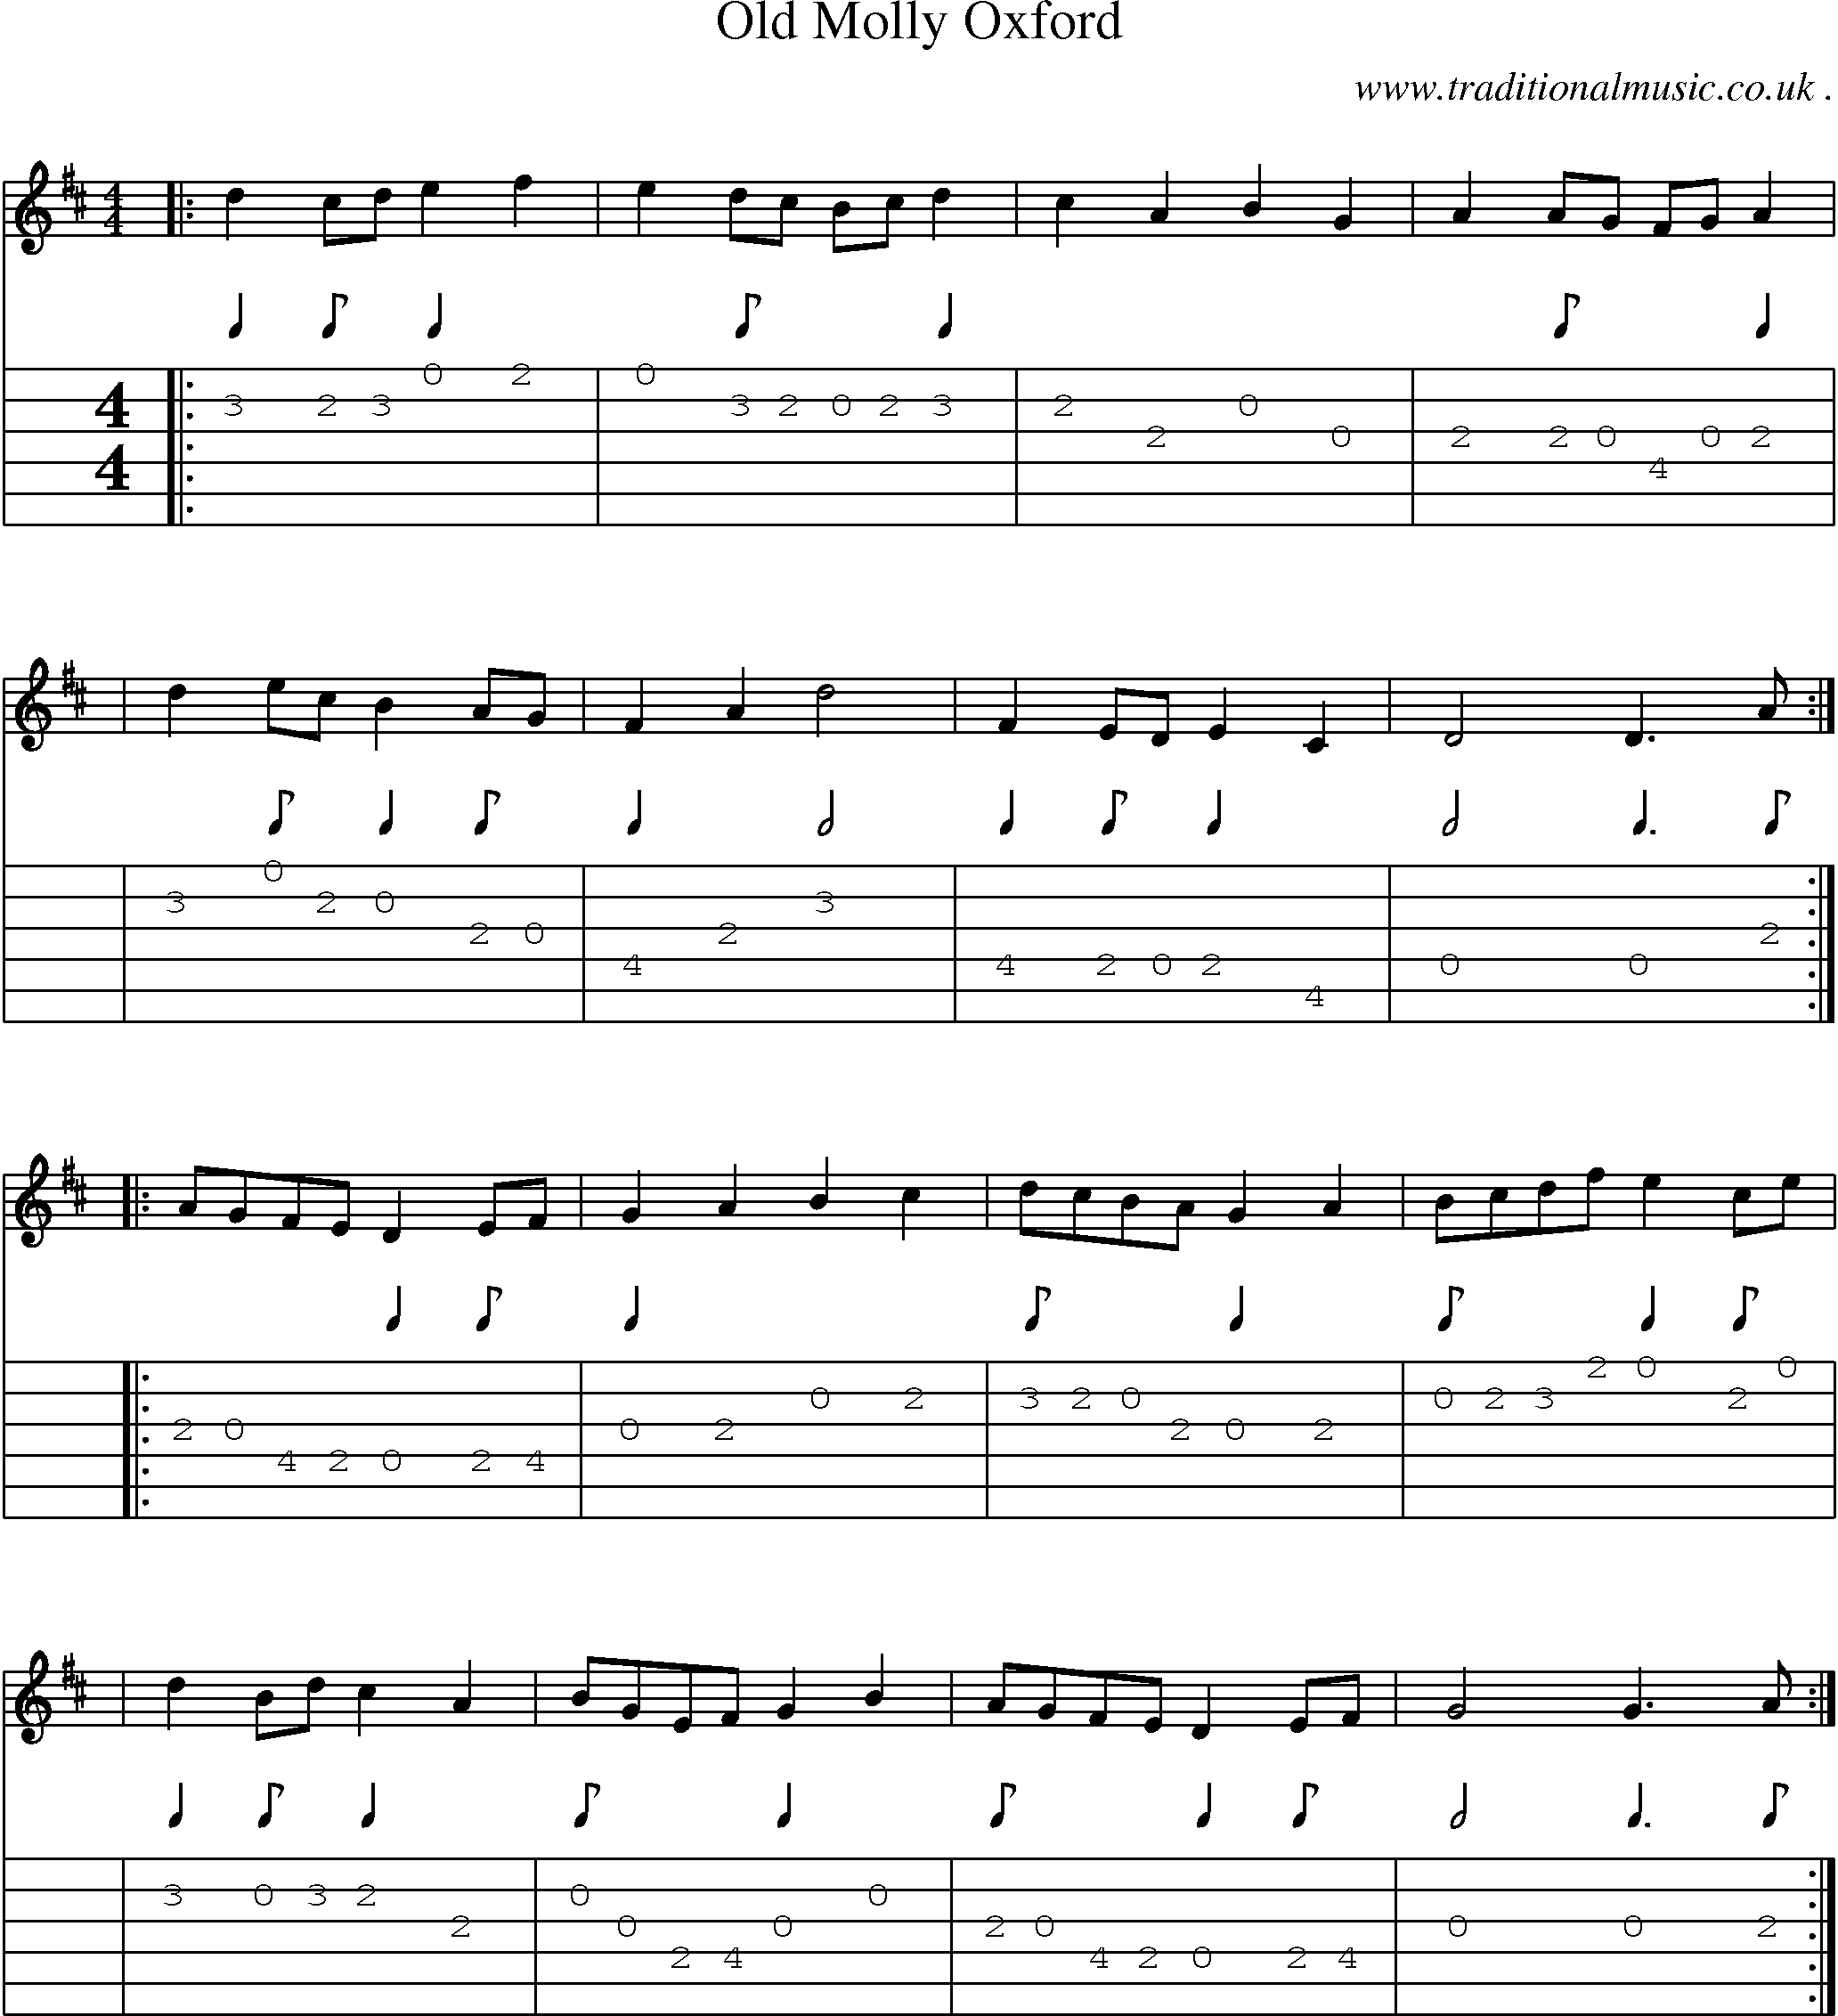 Sheet-Music and Guitar Tabs for Old Molly Oxford